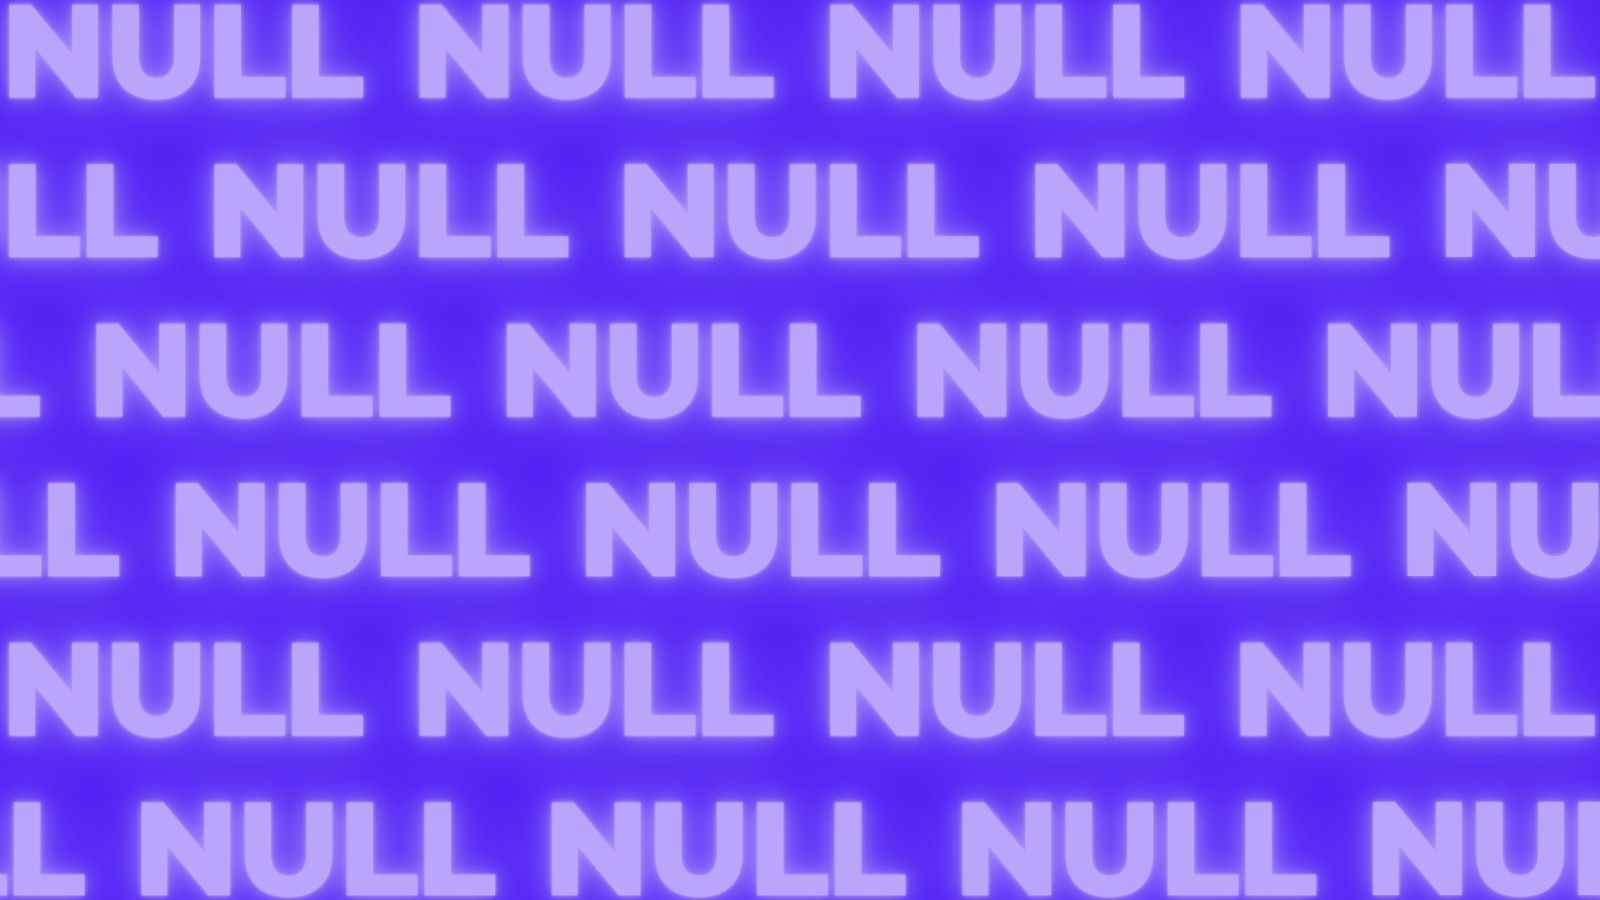 A pattern formed with the null word